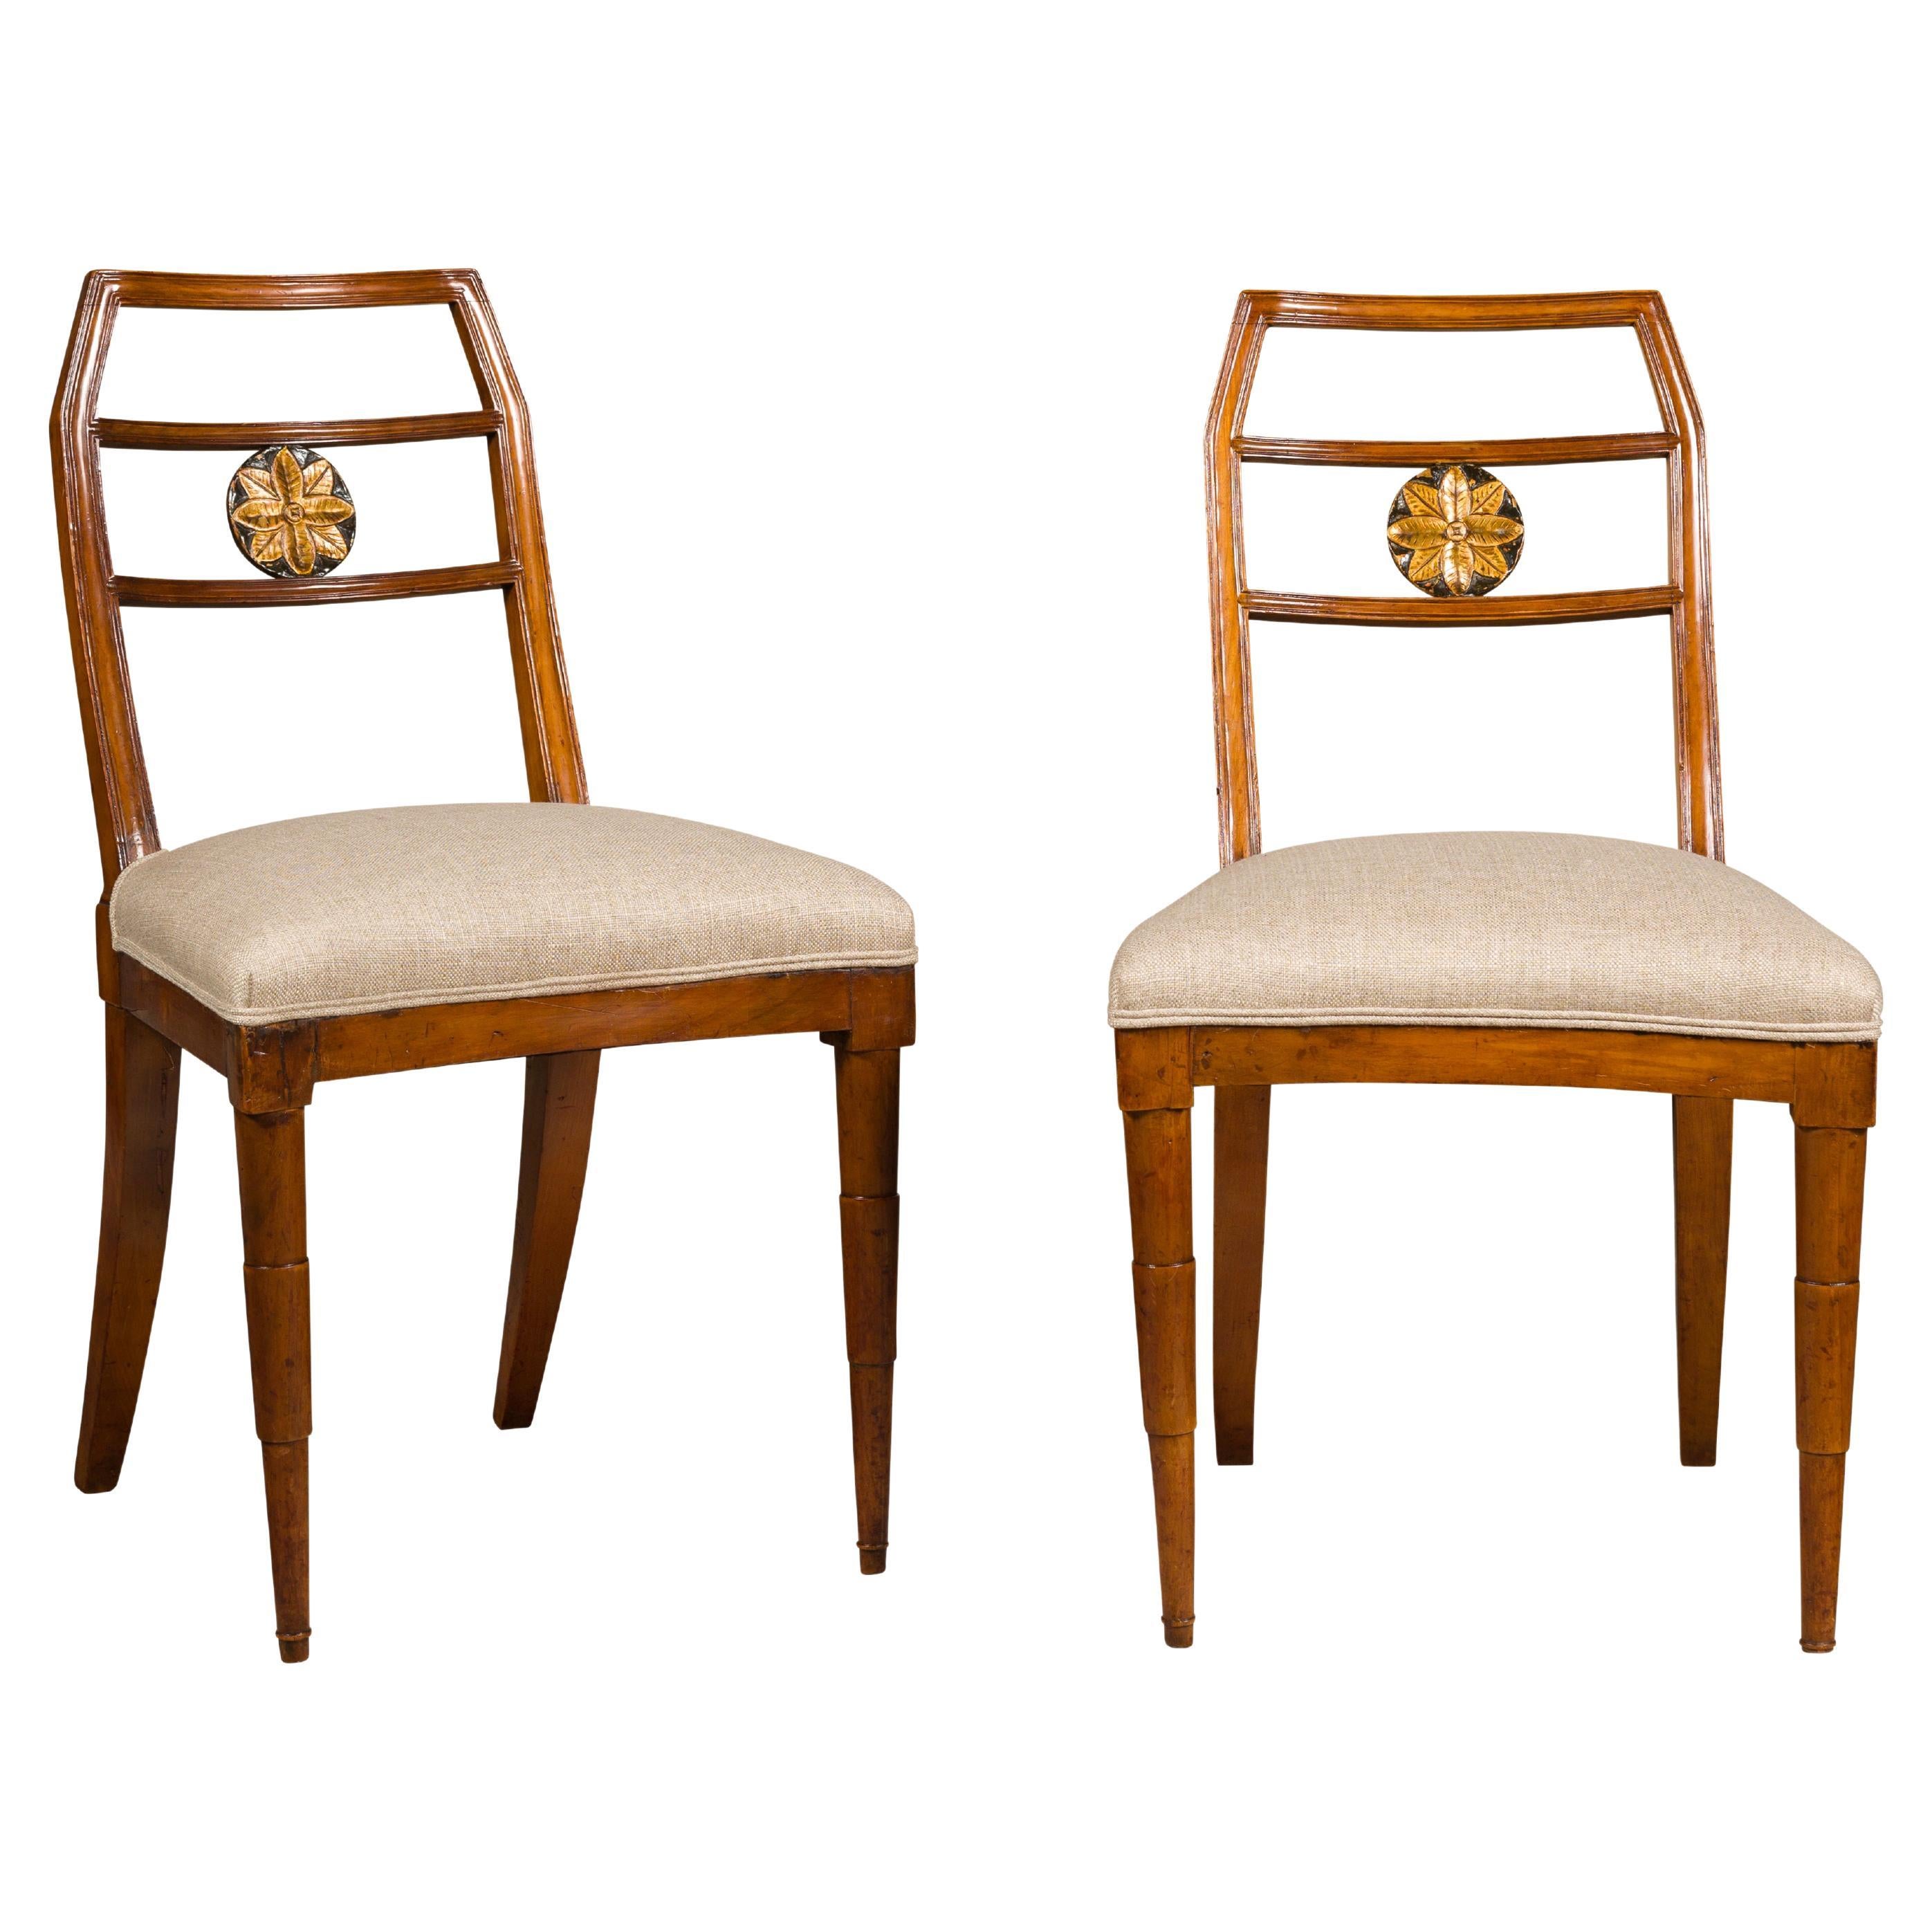 Italian 1800s Walnut Side Chairs with Carved and Gilt Floral Medallions, a Pair For Sale